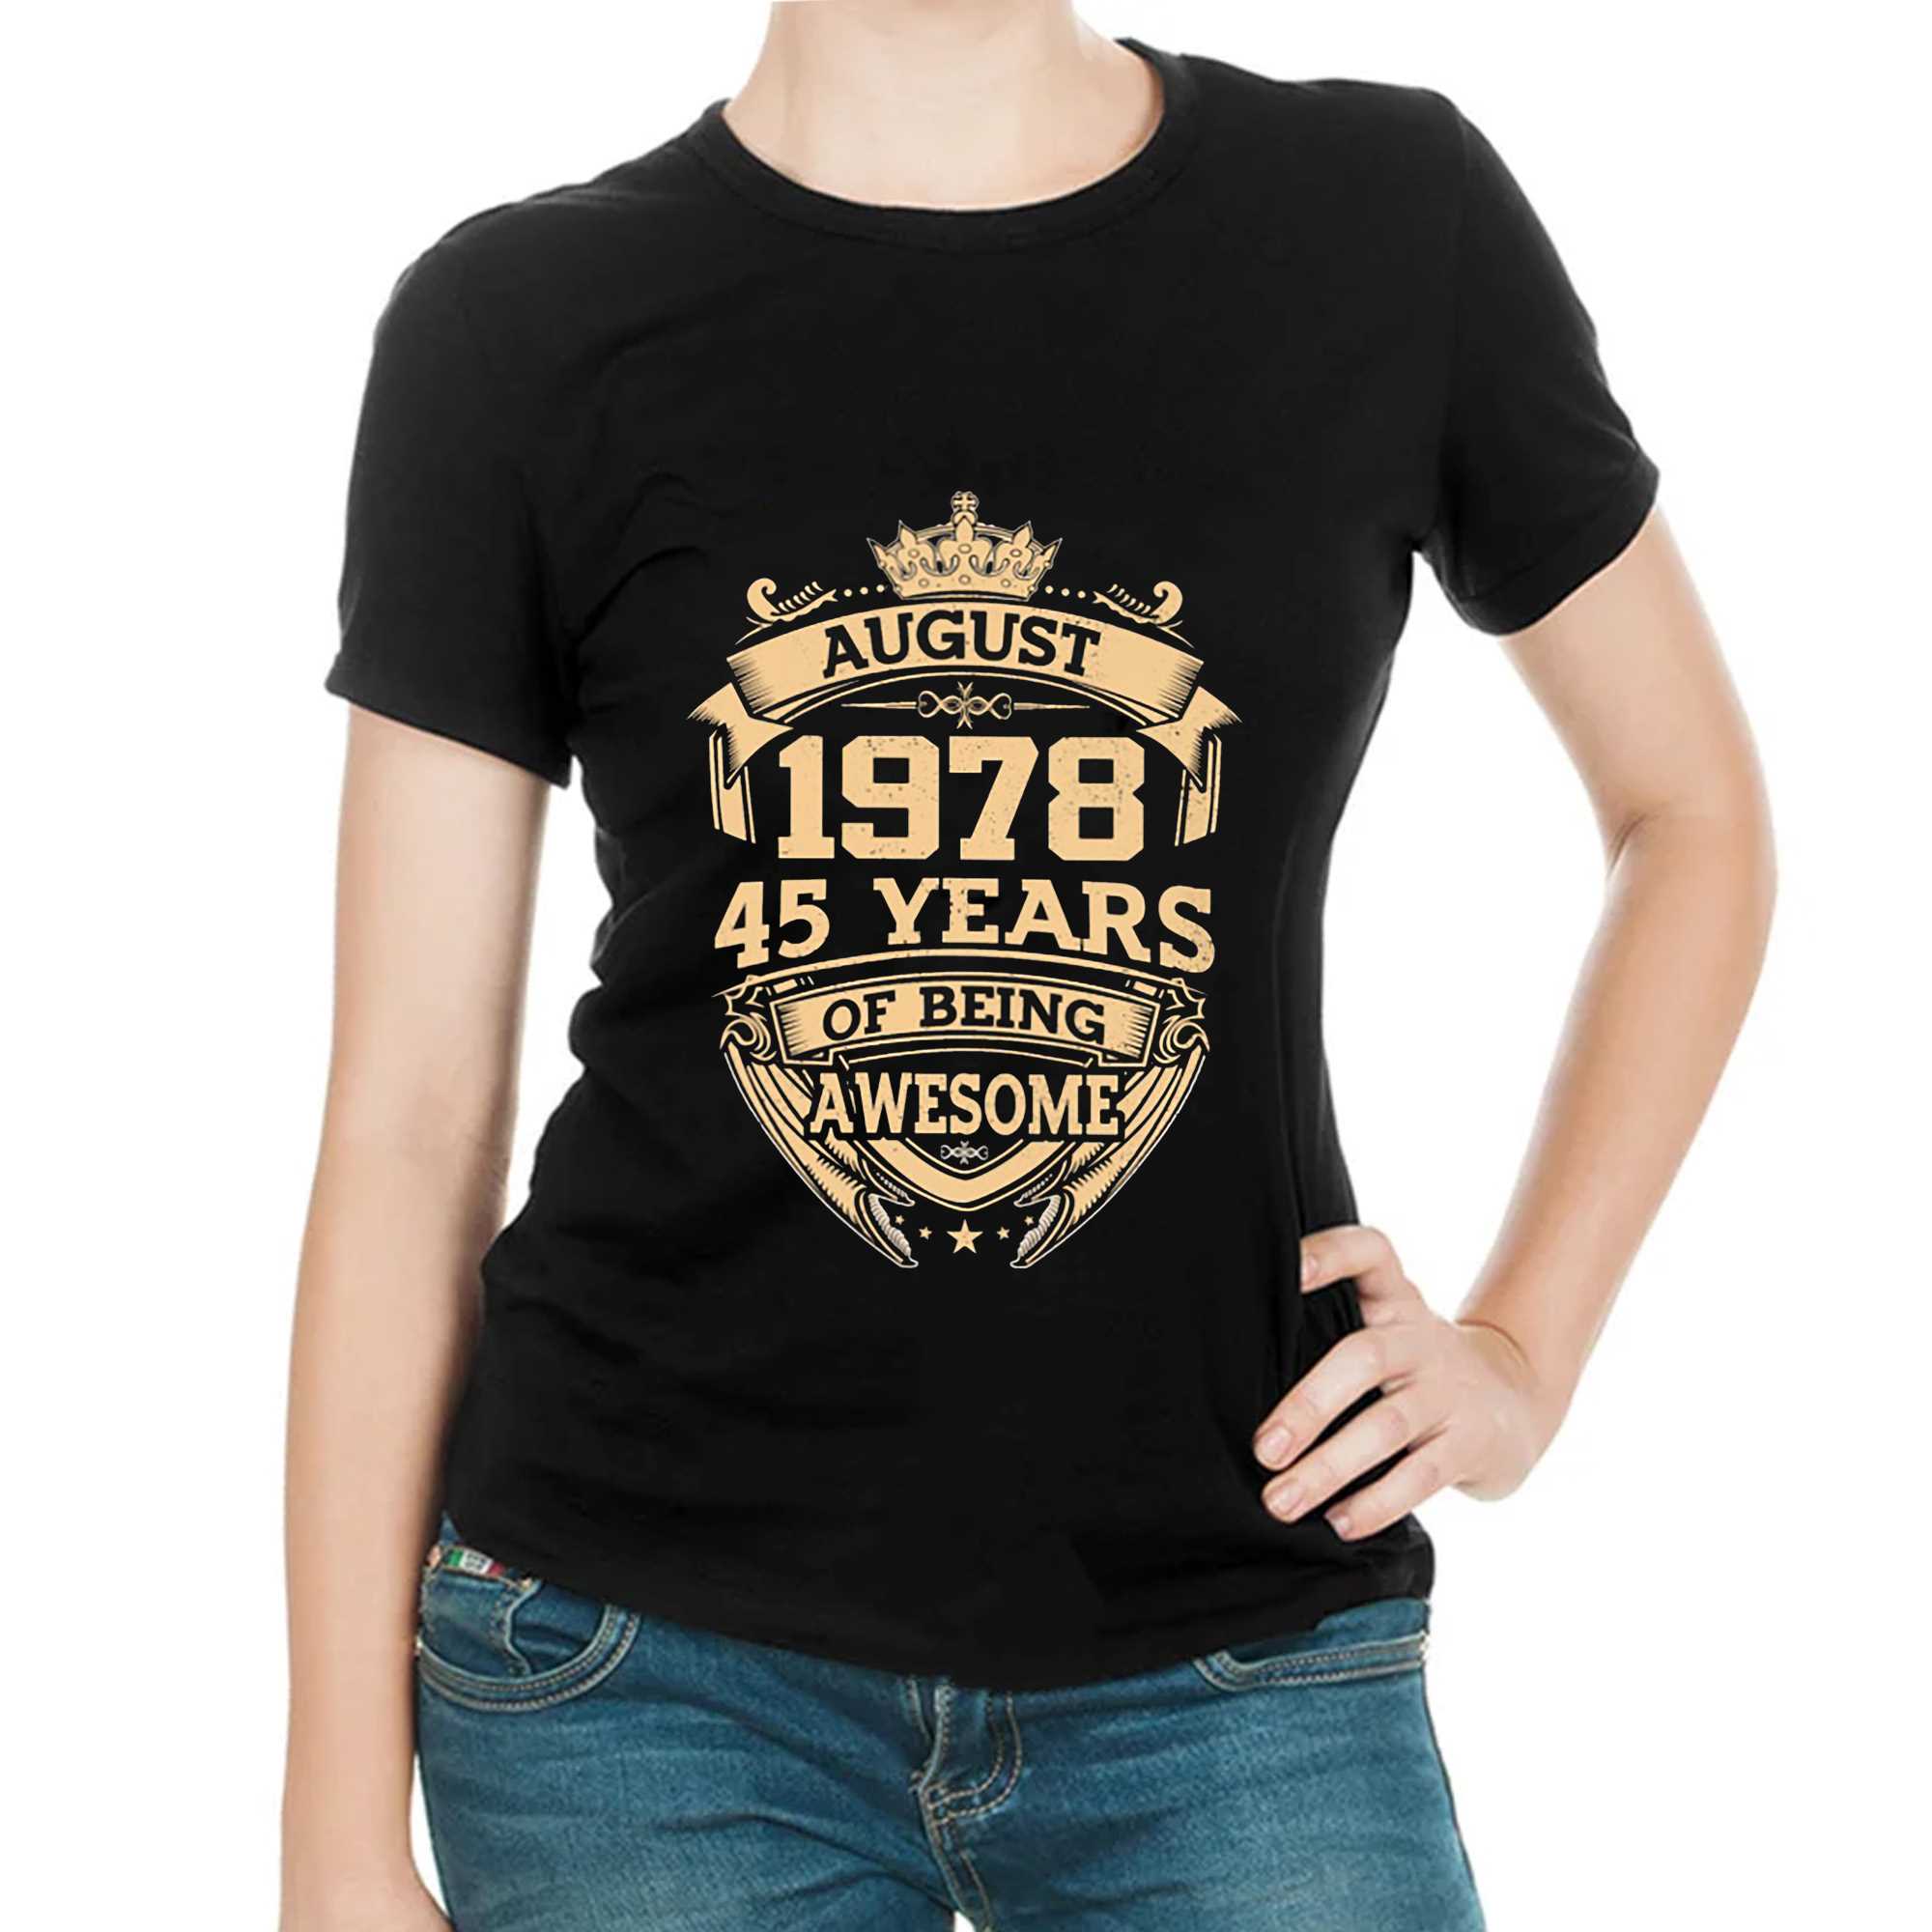 August 1978 45 Years Of Being Awesome Shirt - Shibtee Clothing